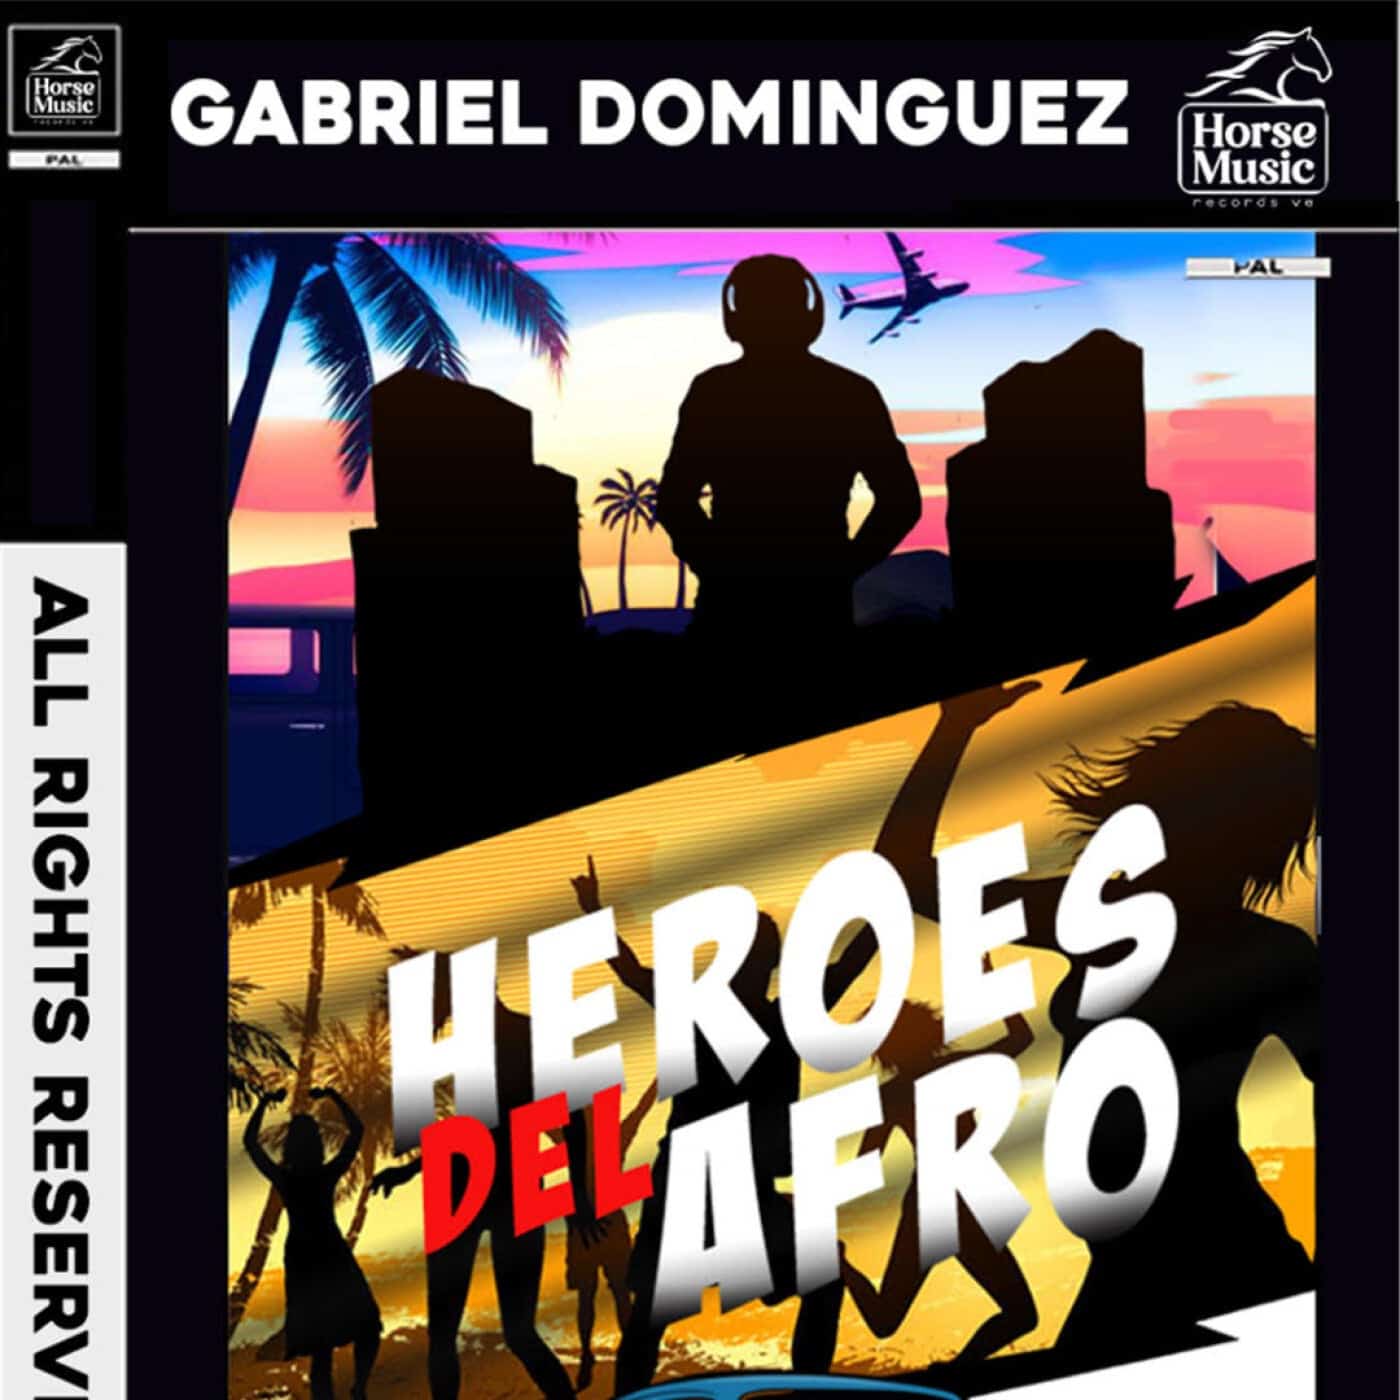 Download Gabriel Dominguez - Heroes del Afro on Electrobuzz